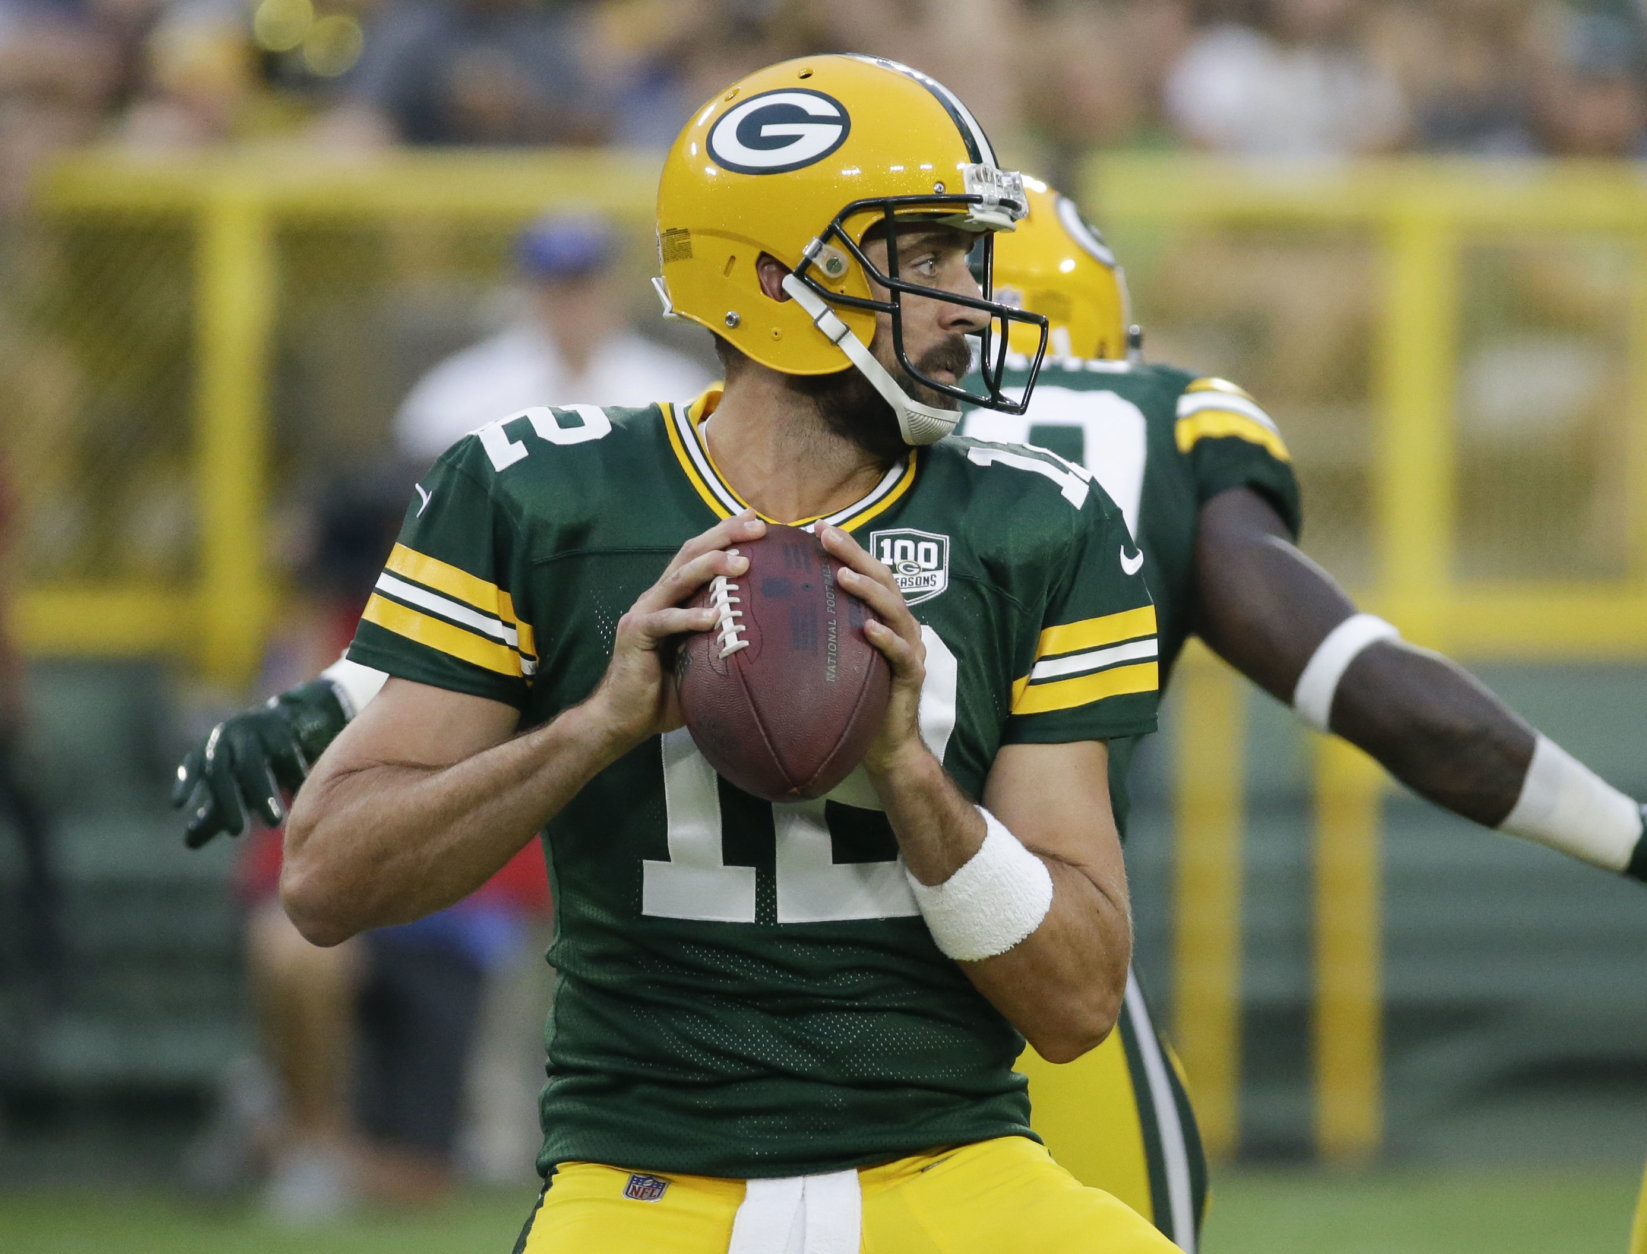 Green Bay Packers' Aaron Rodgers throws during the first half of a preseason NFL football game against the Pittsburgh Steelers Thursday, Aug. 16, 2018, in Green Bay, Wis. (AP Photo/Mike Roemer)